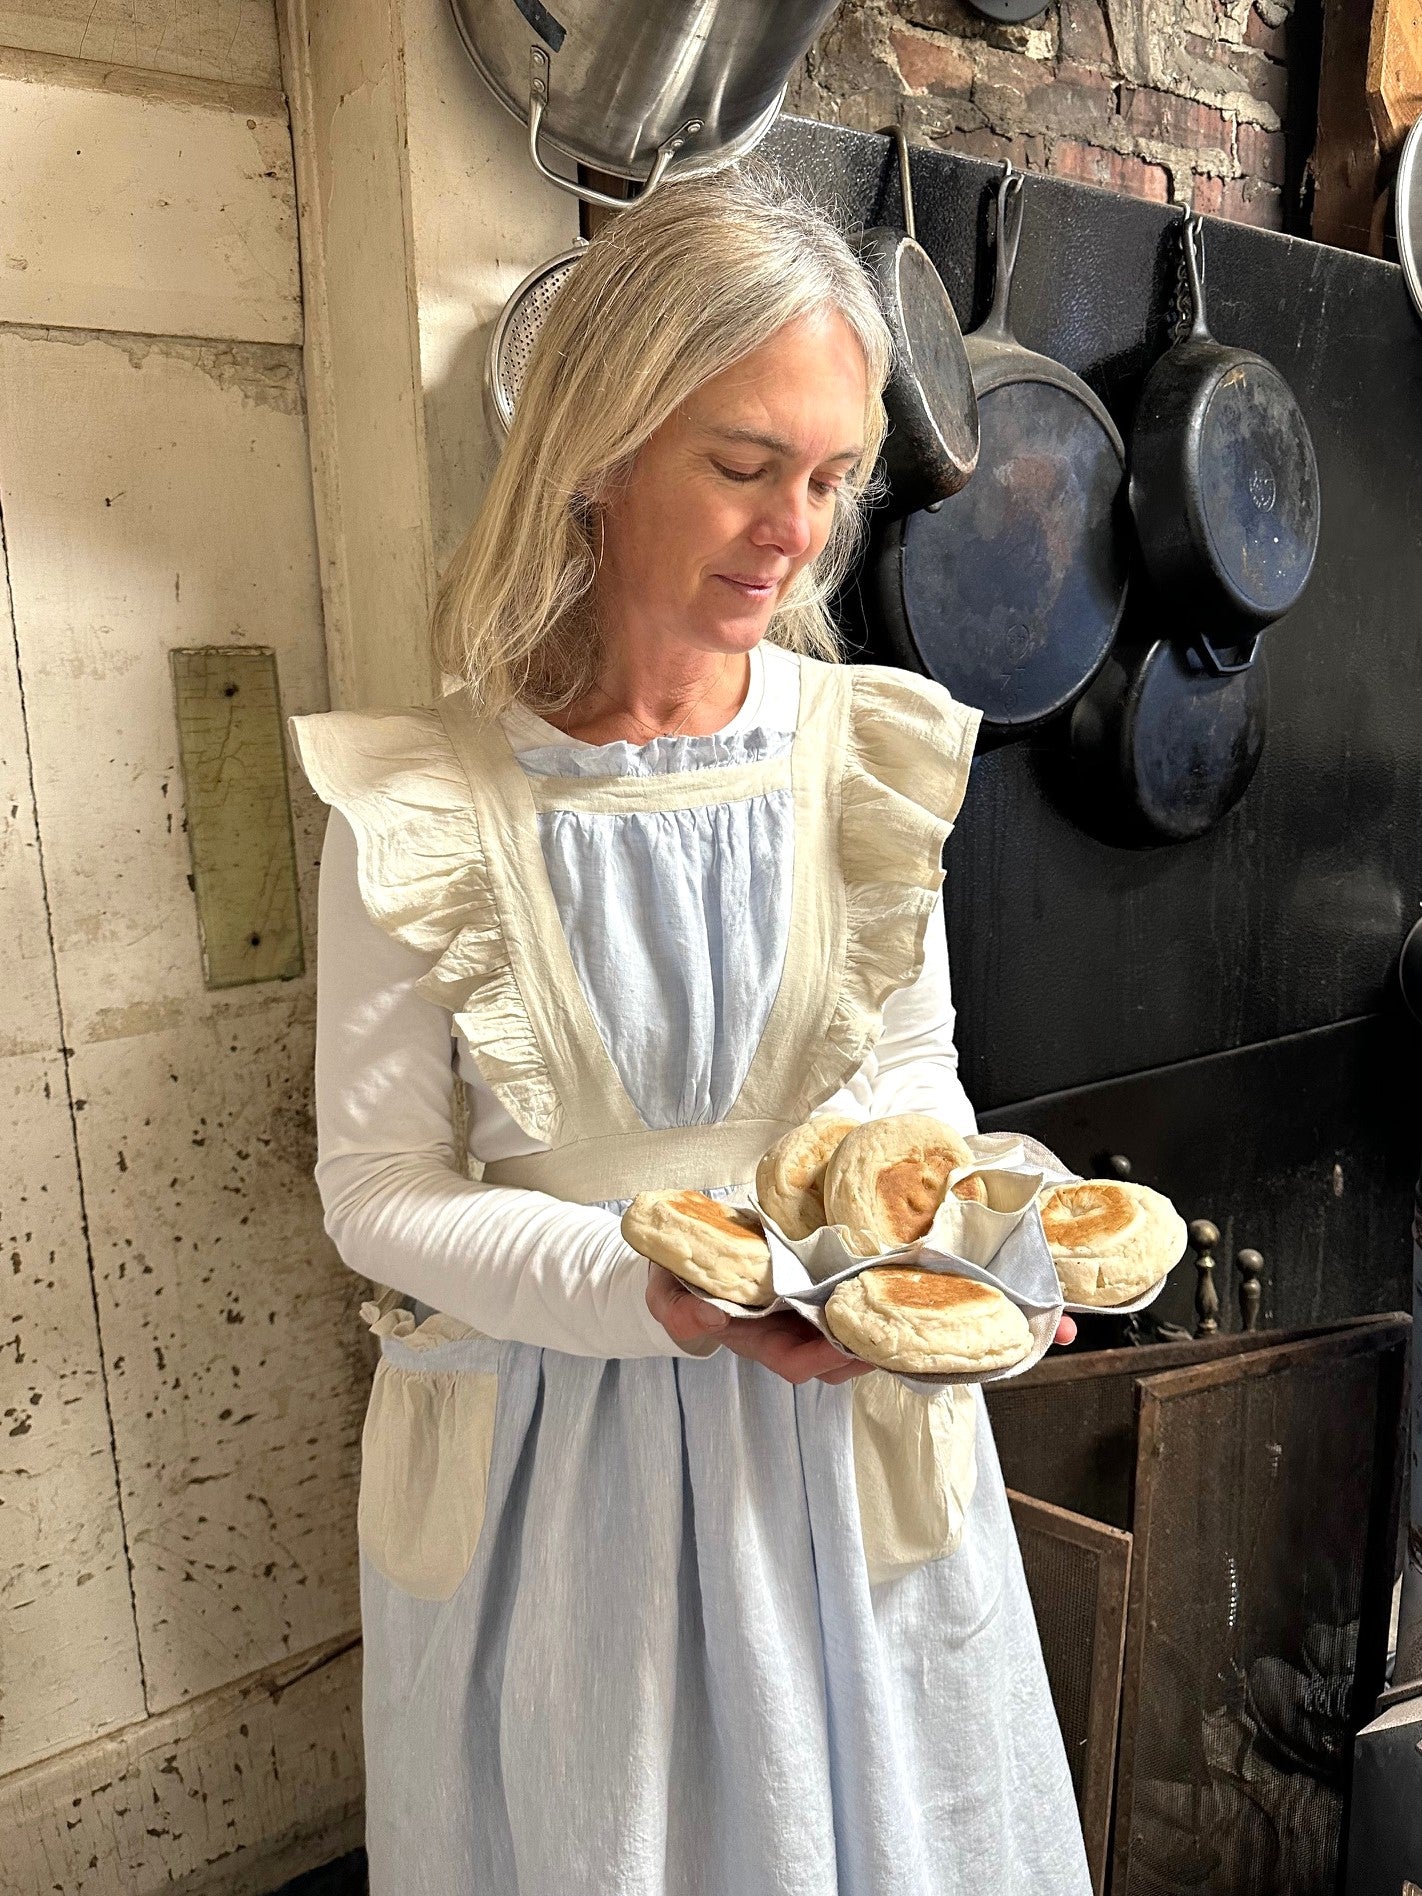 A woman wearing the blue linen apron with beige ruffled straps , pockets and waistband. She is holding biscuits in the biscuit cozy looking down at them. She is inside a kitchen with pots and pans in the background.